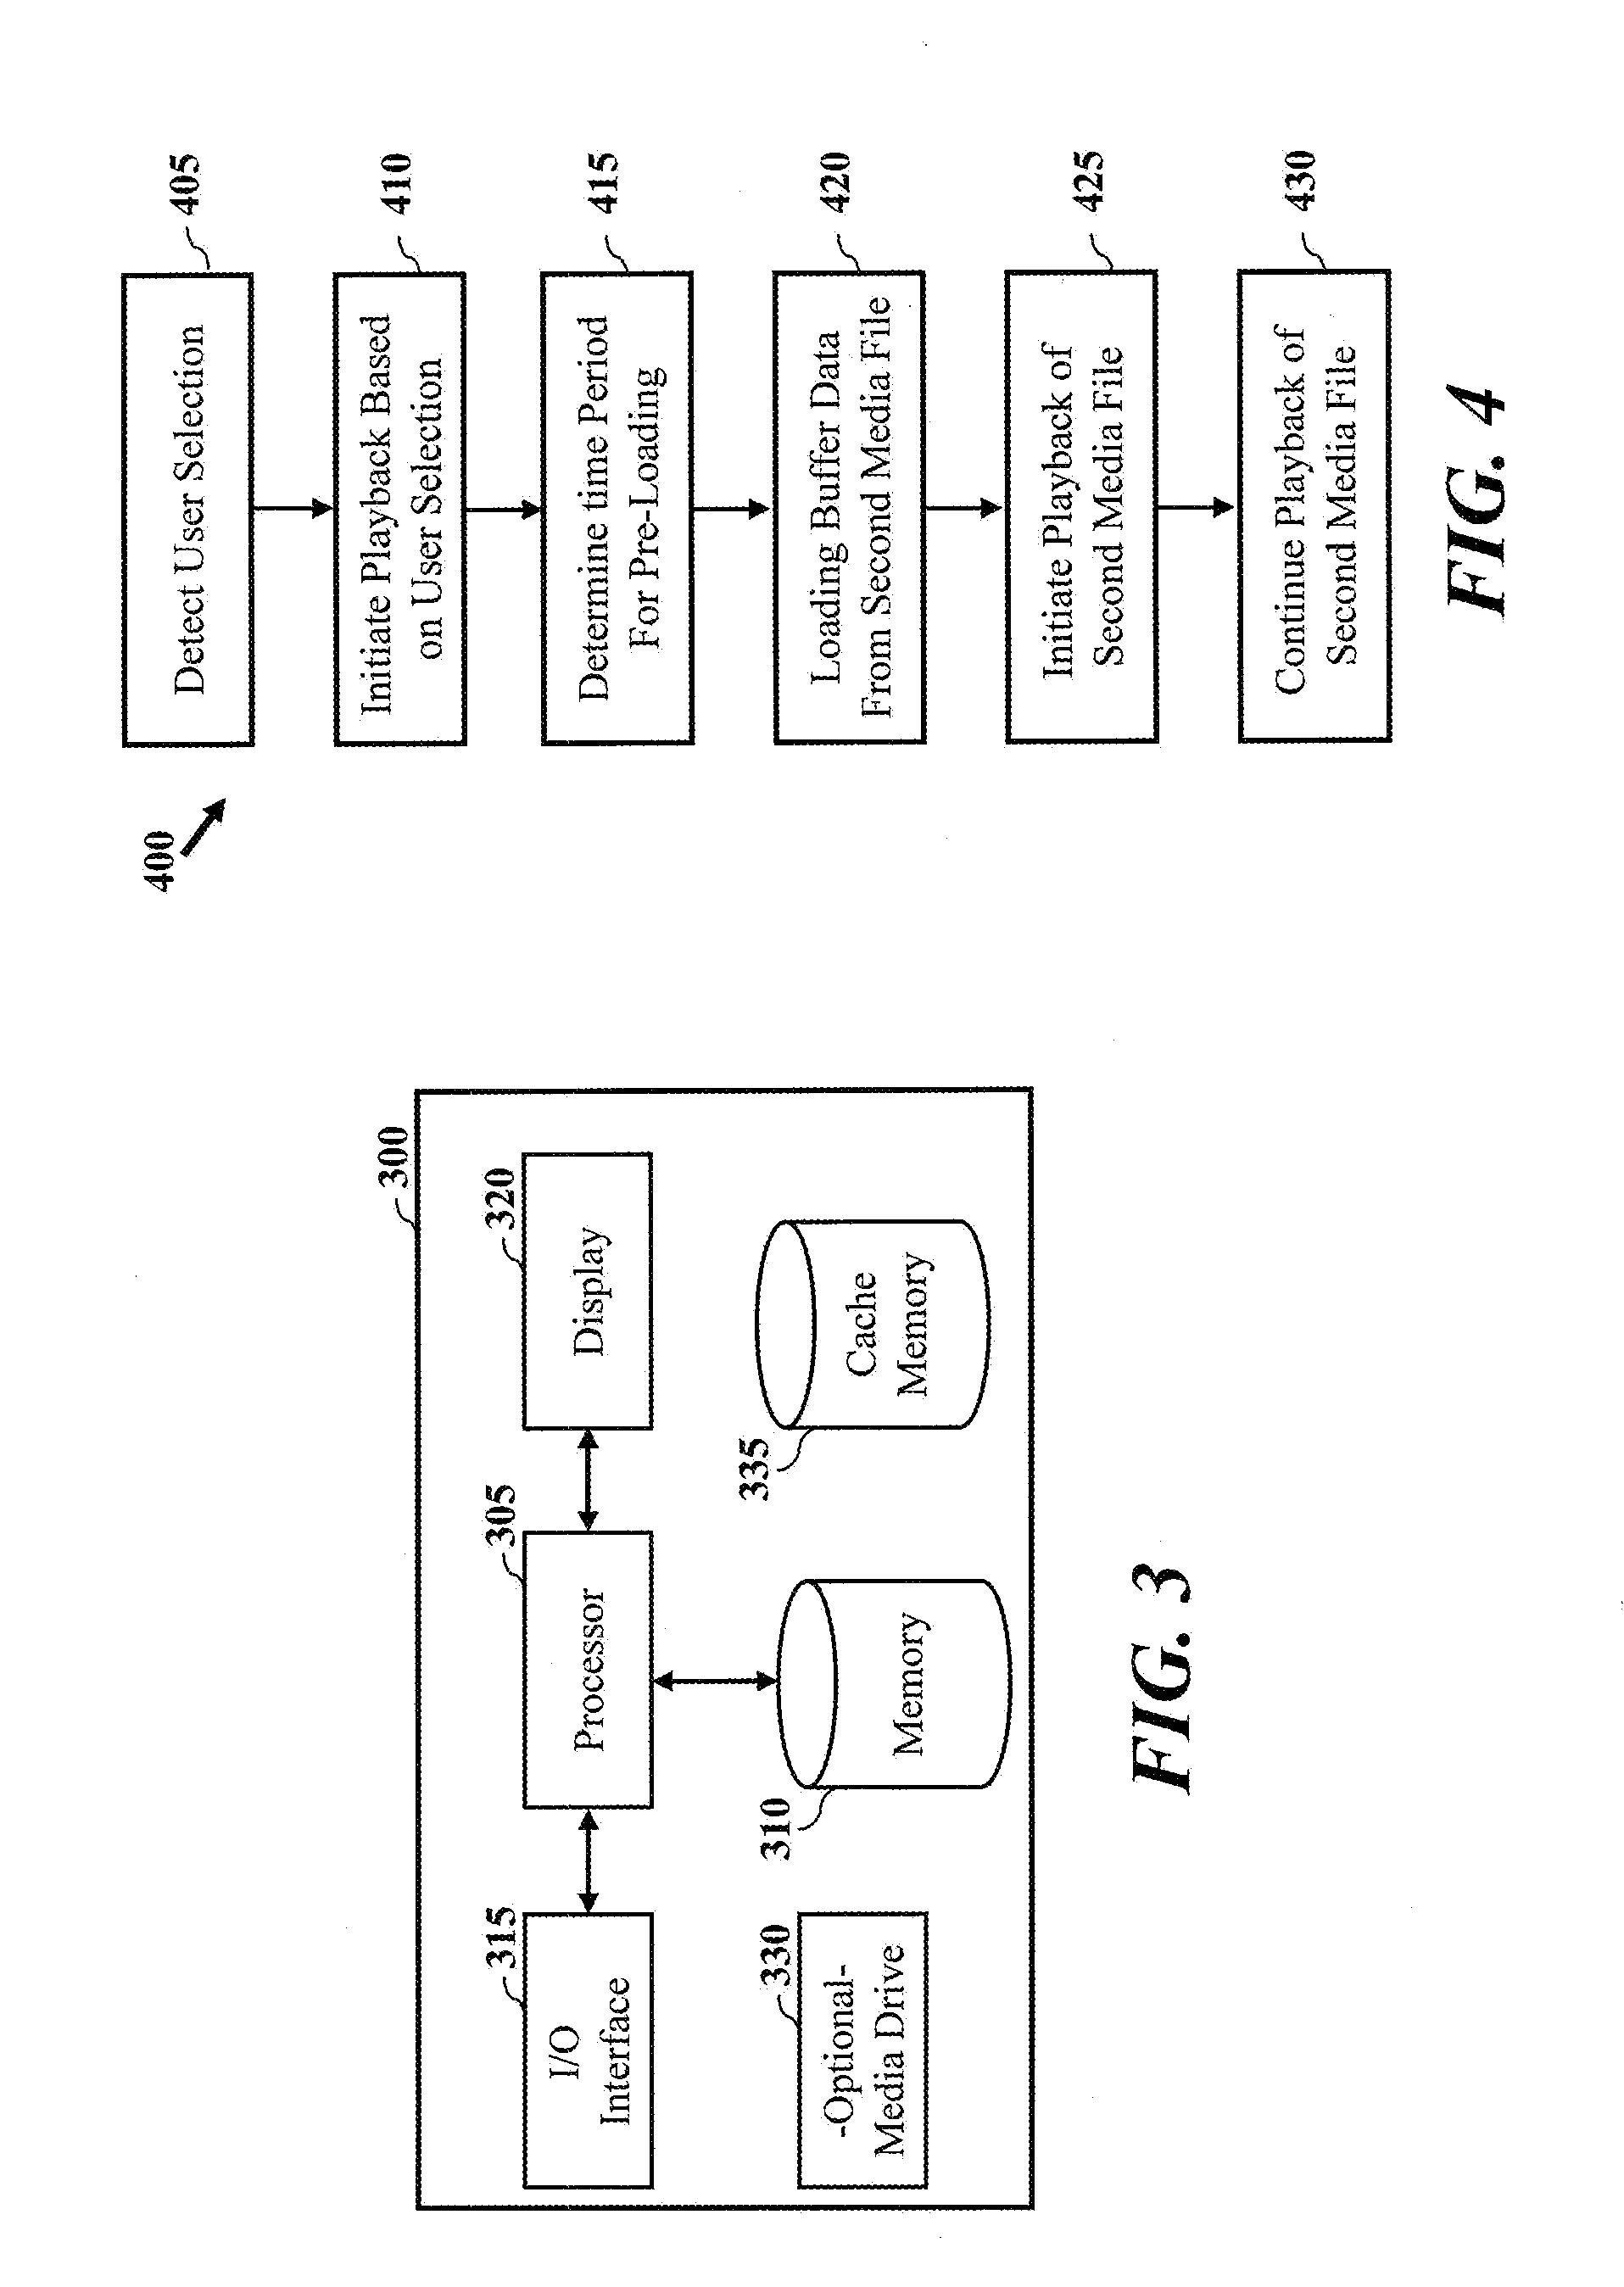 Method and apparatus for seamless playback of media